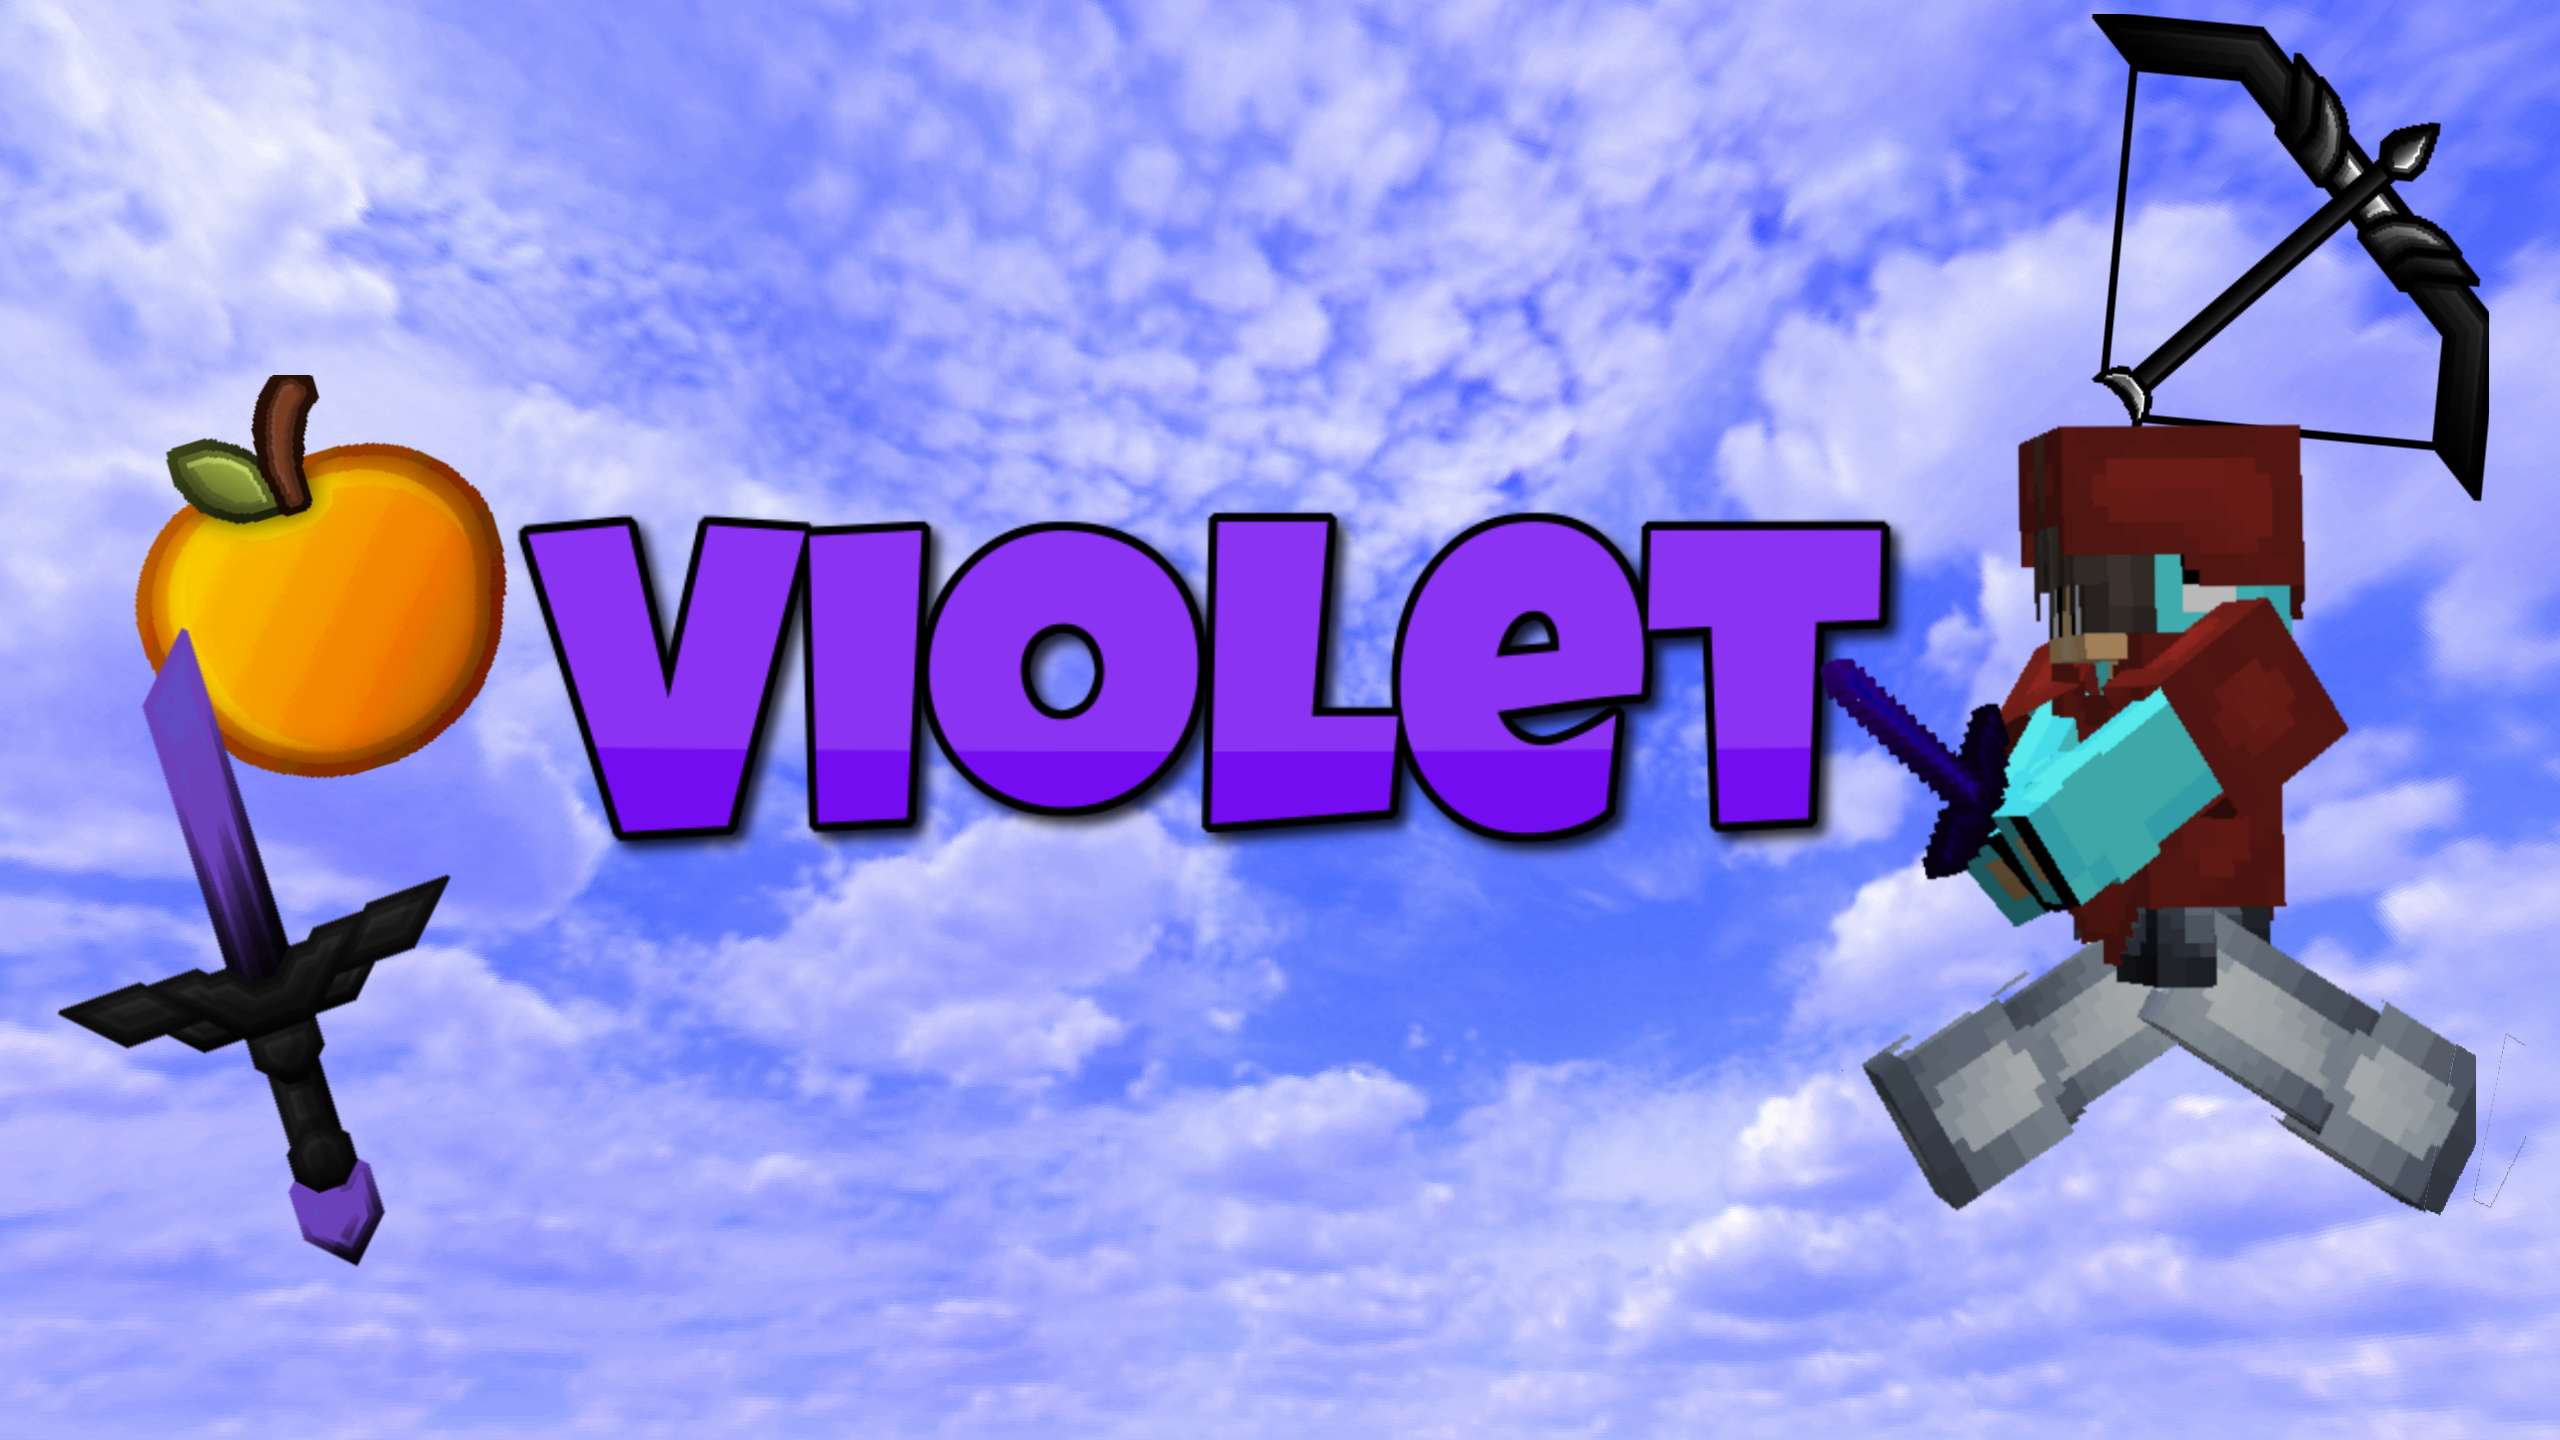 Violet 32x by ander on PvPRP